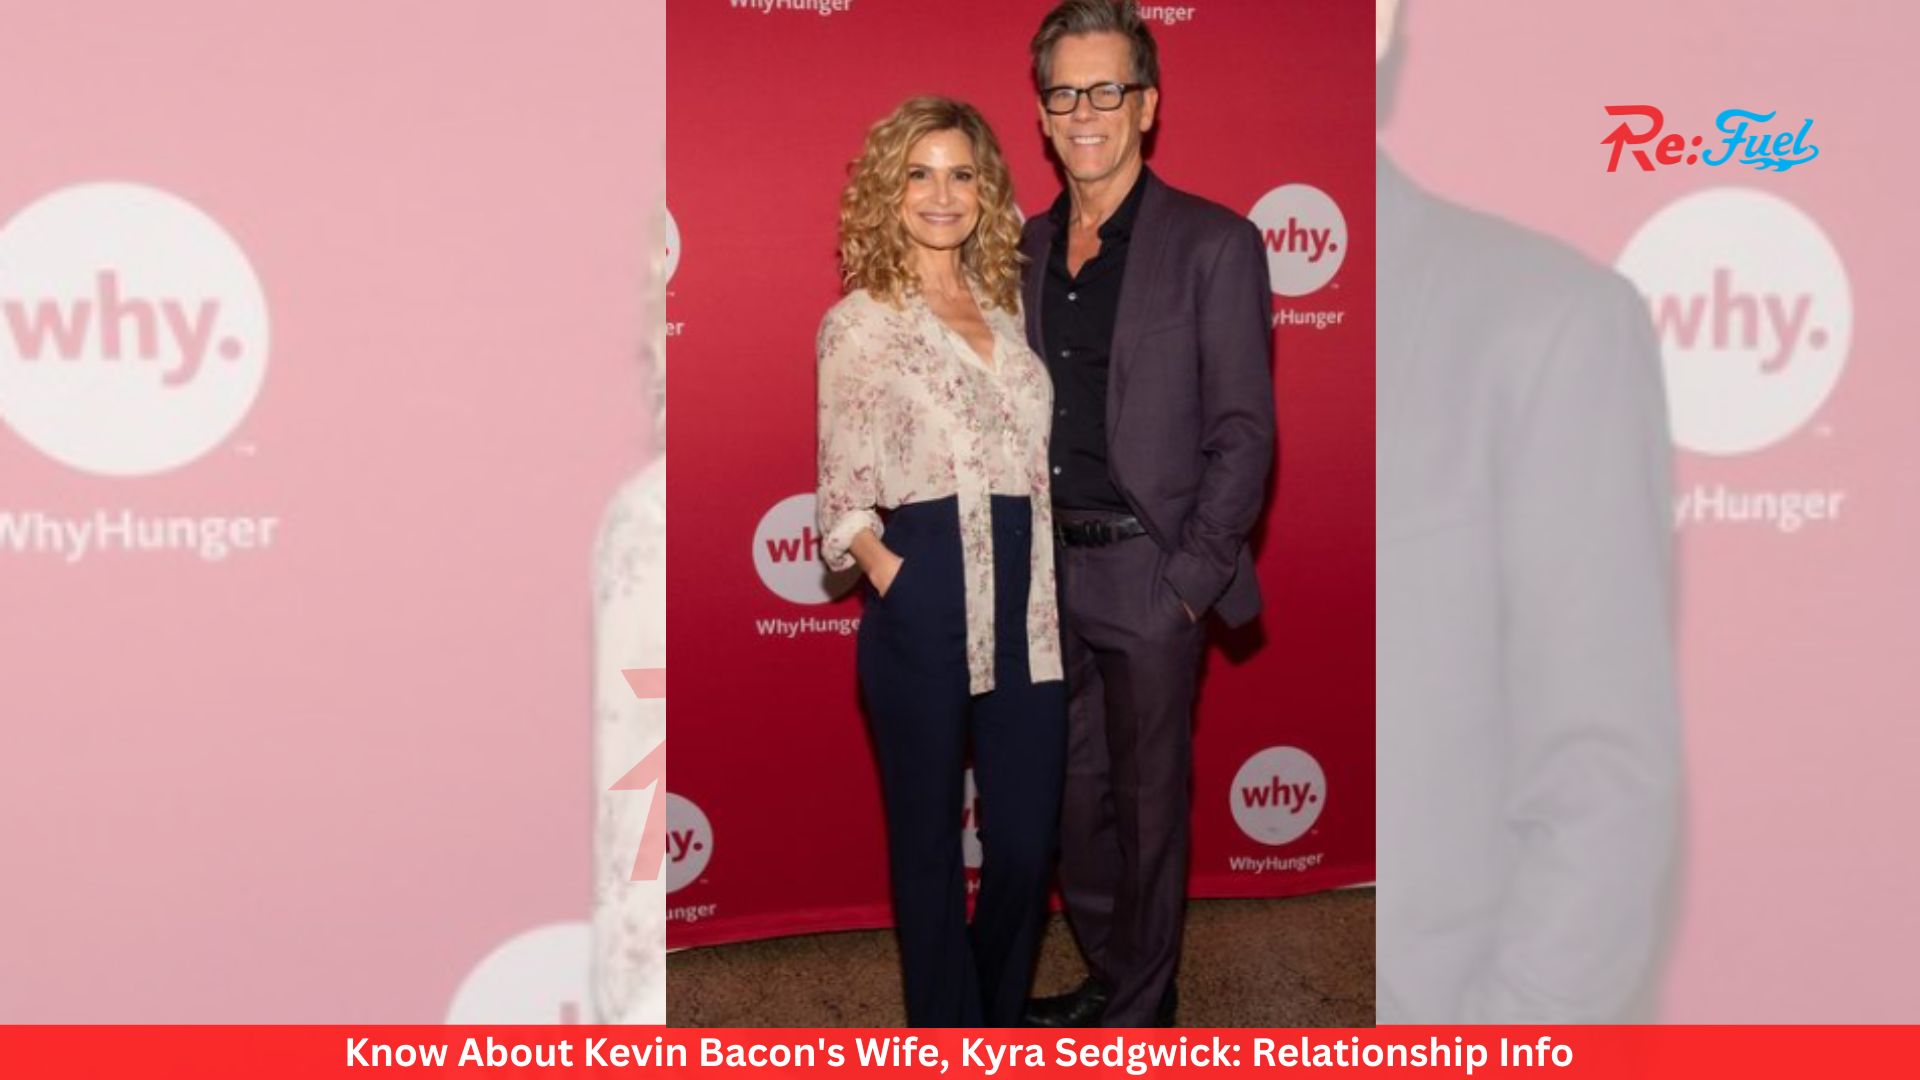 Know About Kevin Bacon's Wife, Kyra Sedgwick: Relationship Info